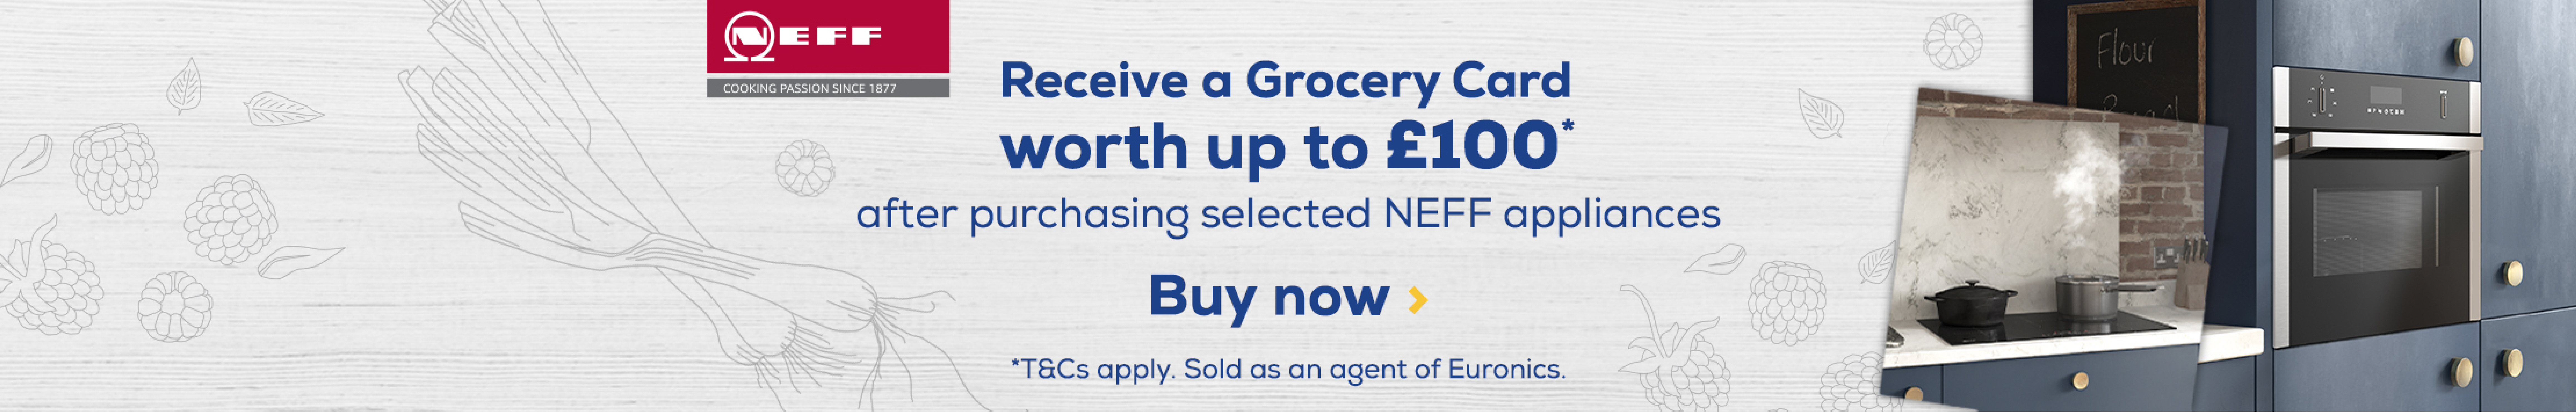 NEFF Grocery Card Offer